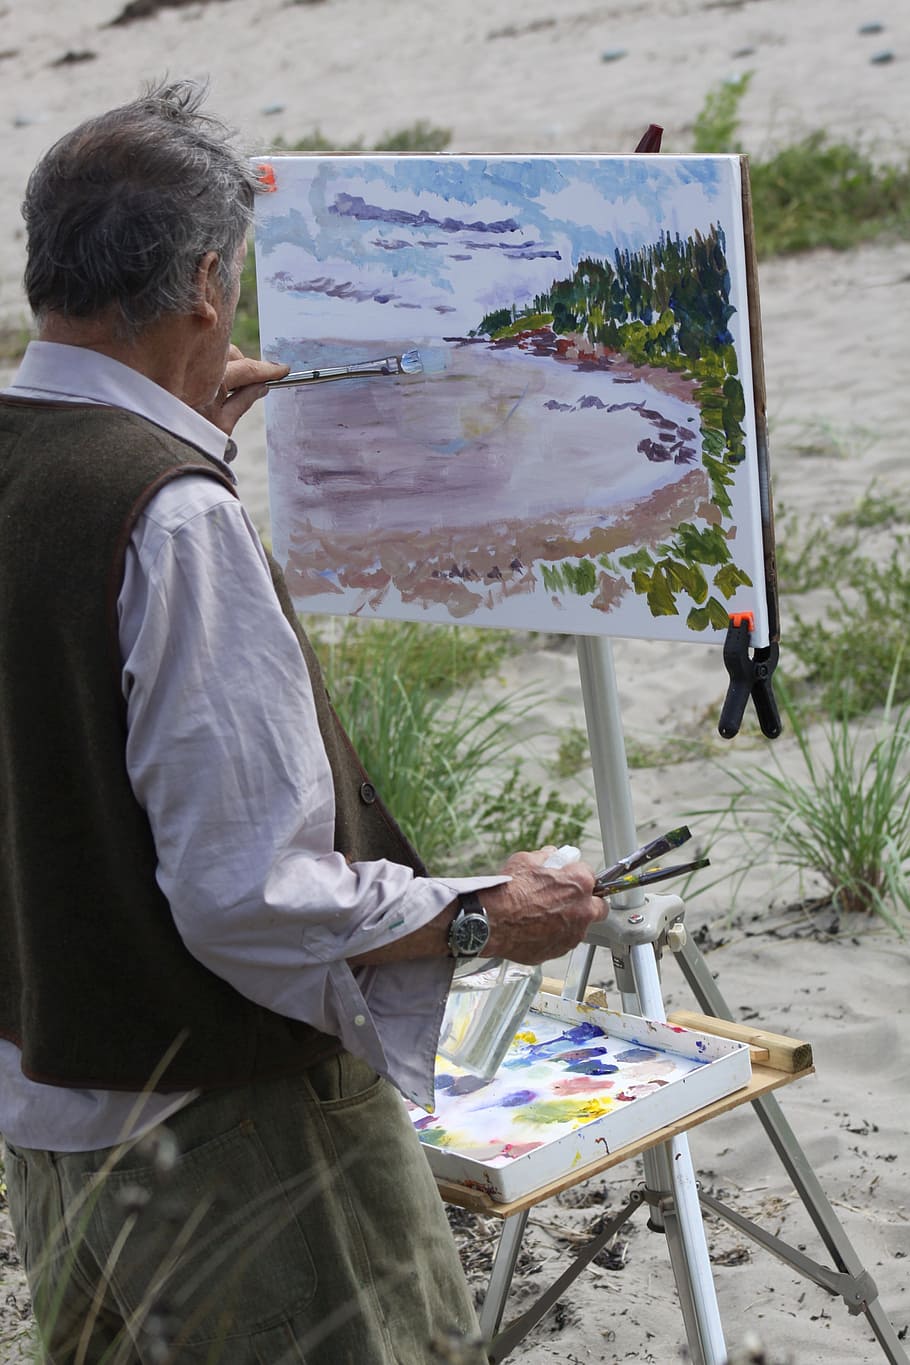 artist, painting, outdoors, close-up, seascape, one person, holding, occupation, paintbrush, brush